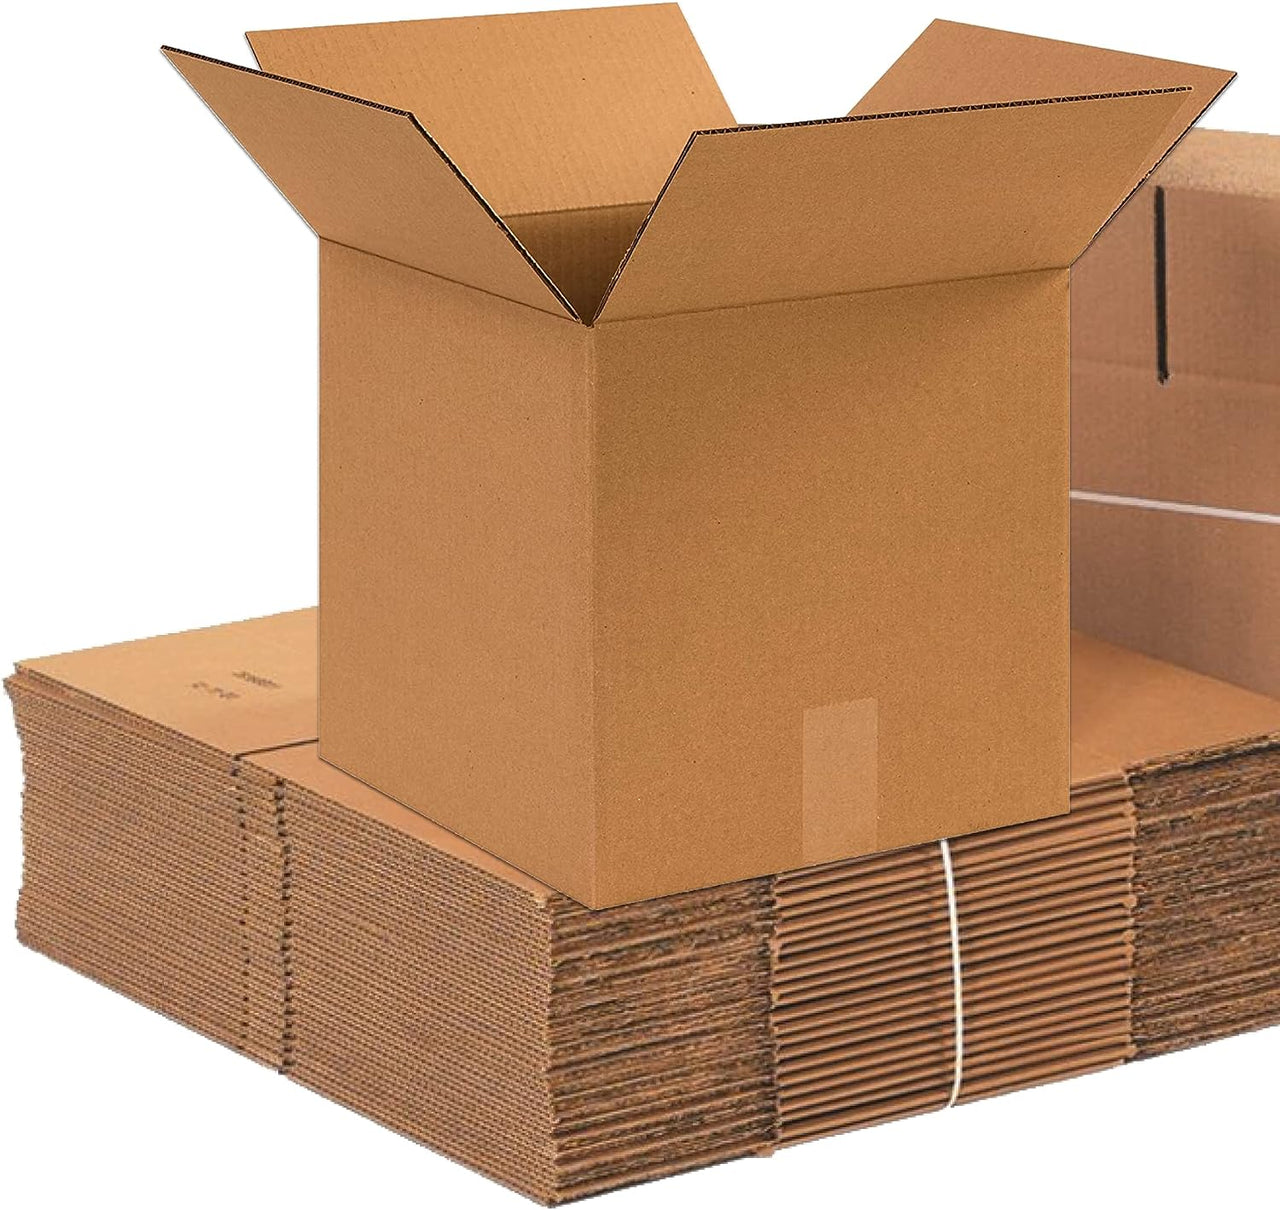 Shipping Boxes 16"L x 16"W x 16"H 25-Pack Corrugated Cardboard Box for Packing Moving Storage